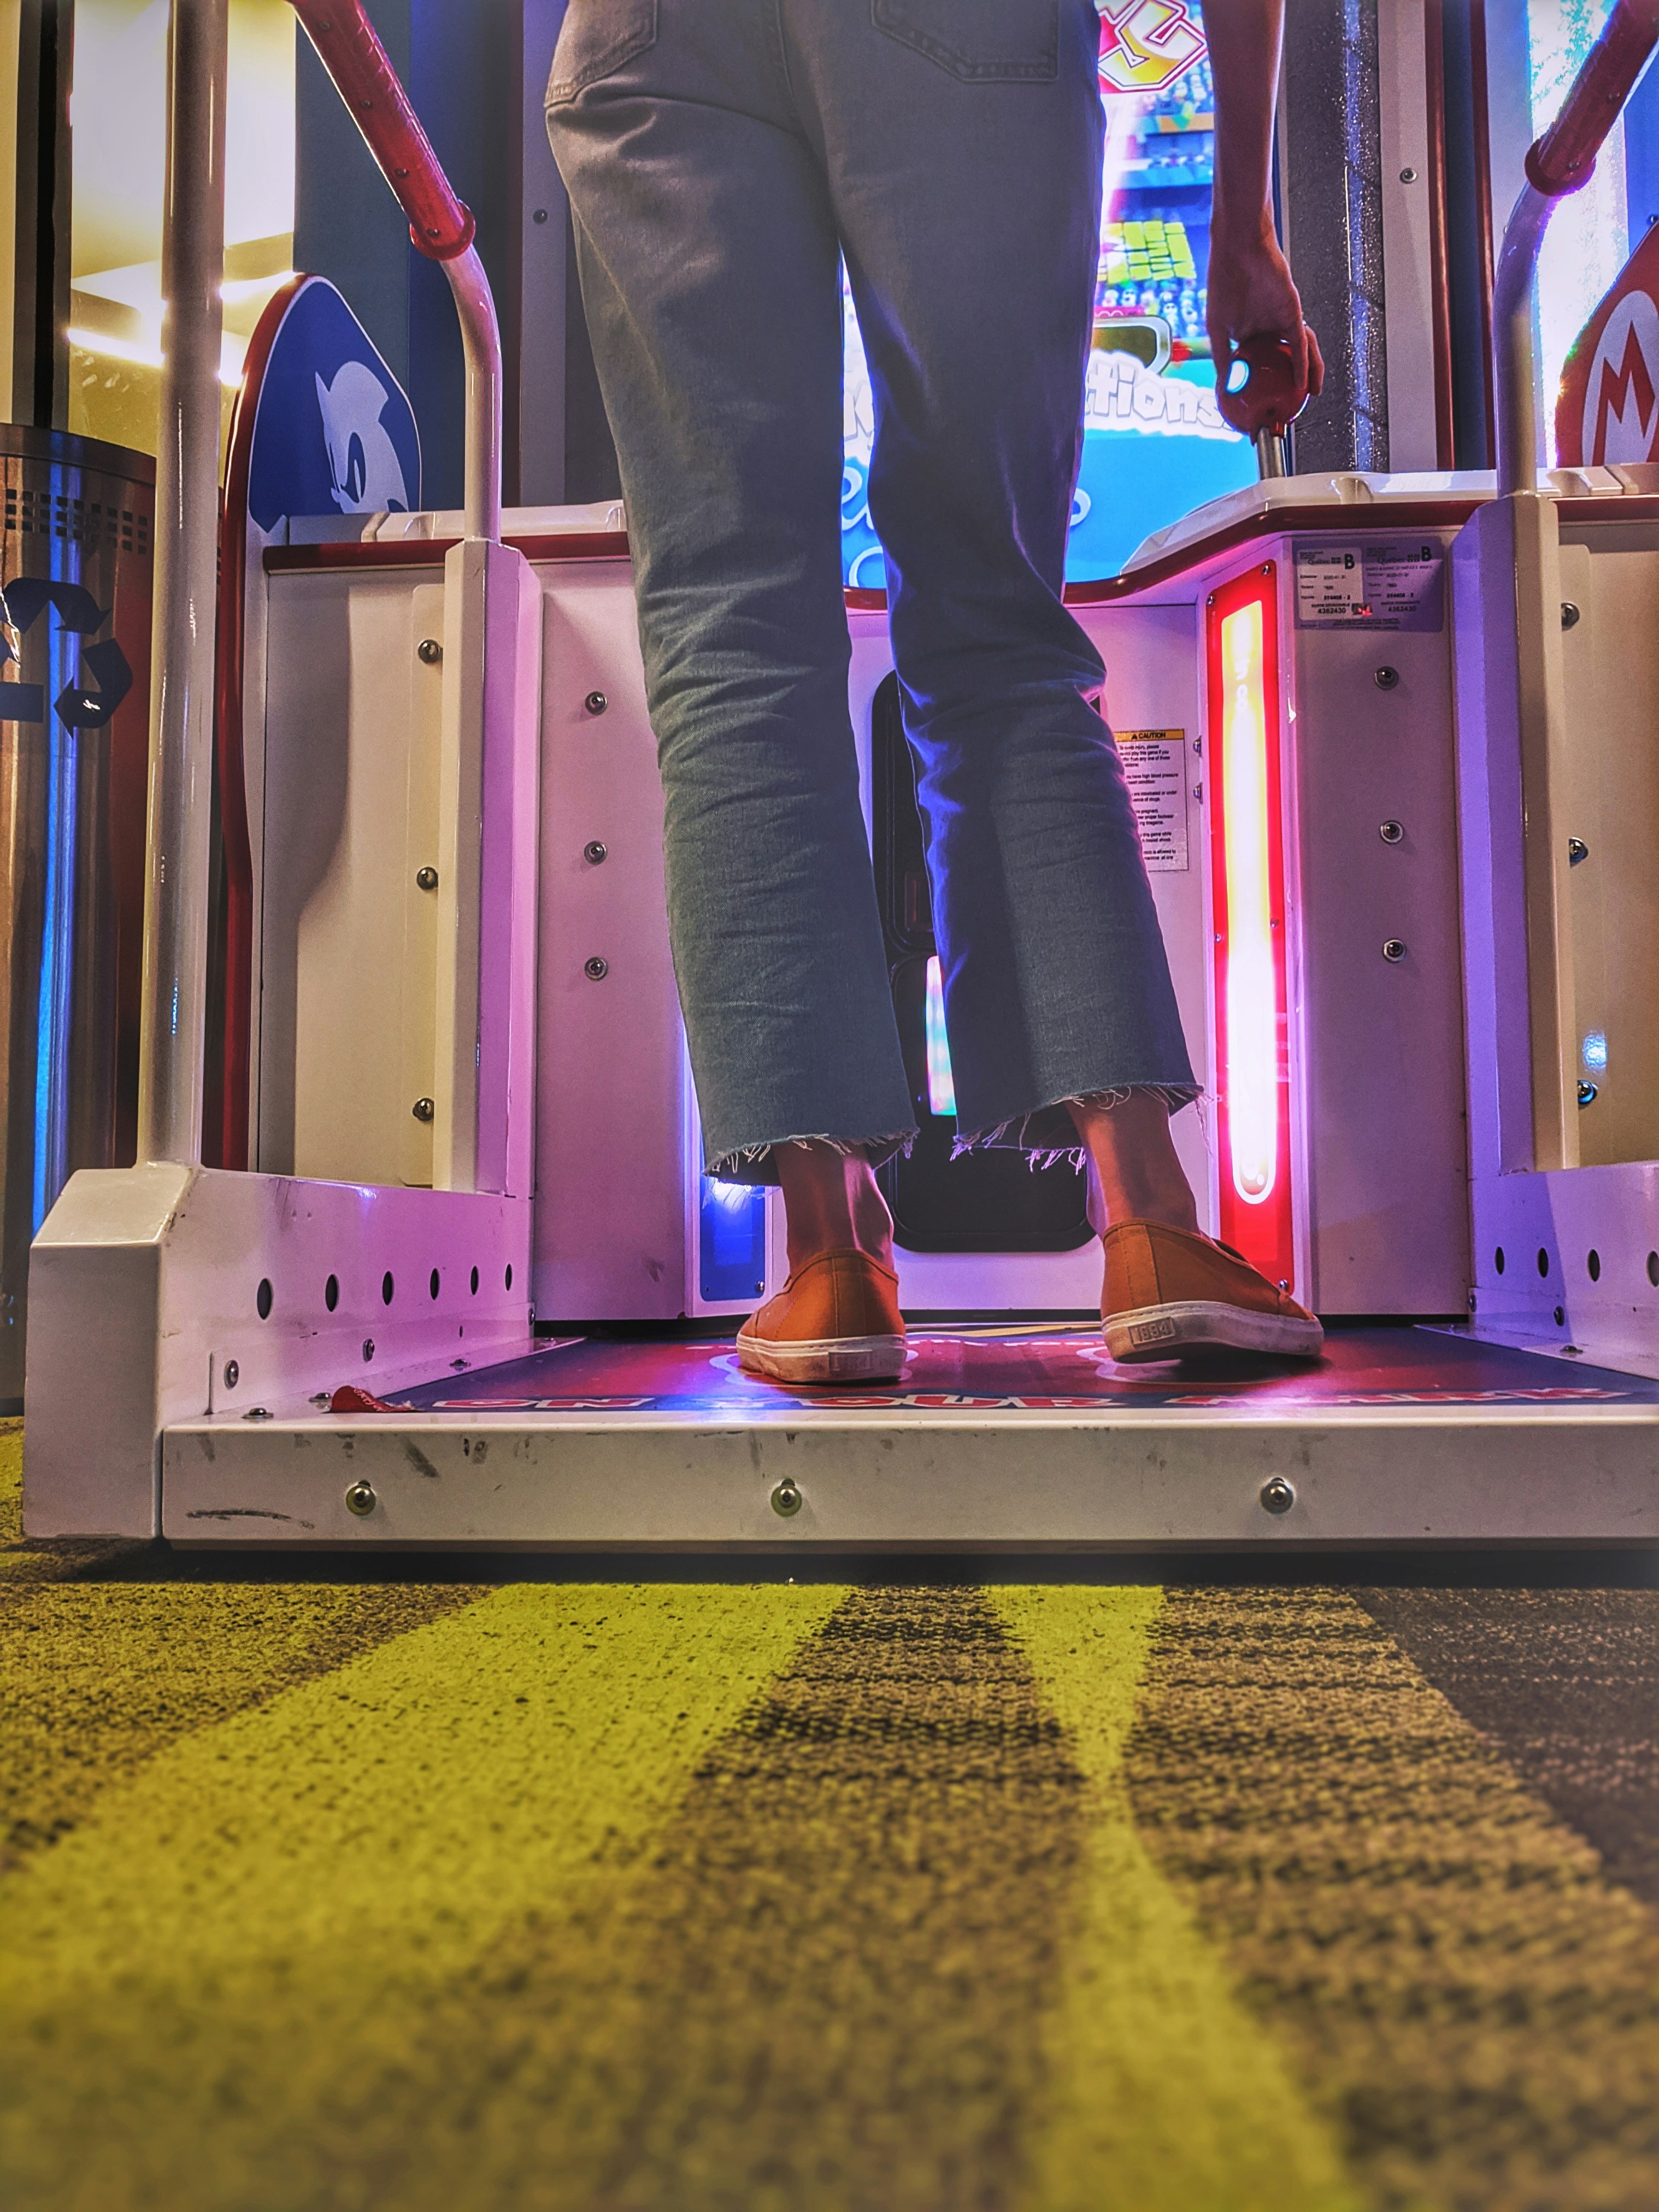 Young woman standing and playing on a videogame arcade machine.